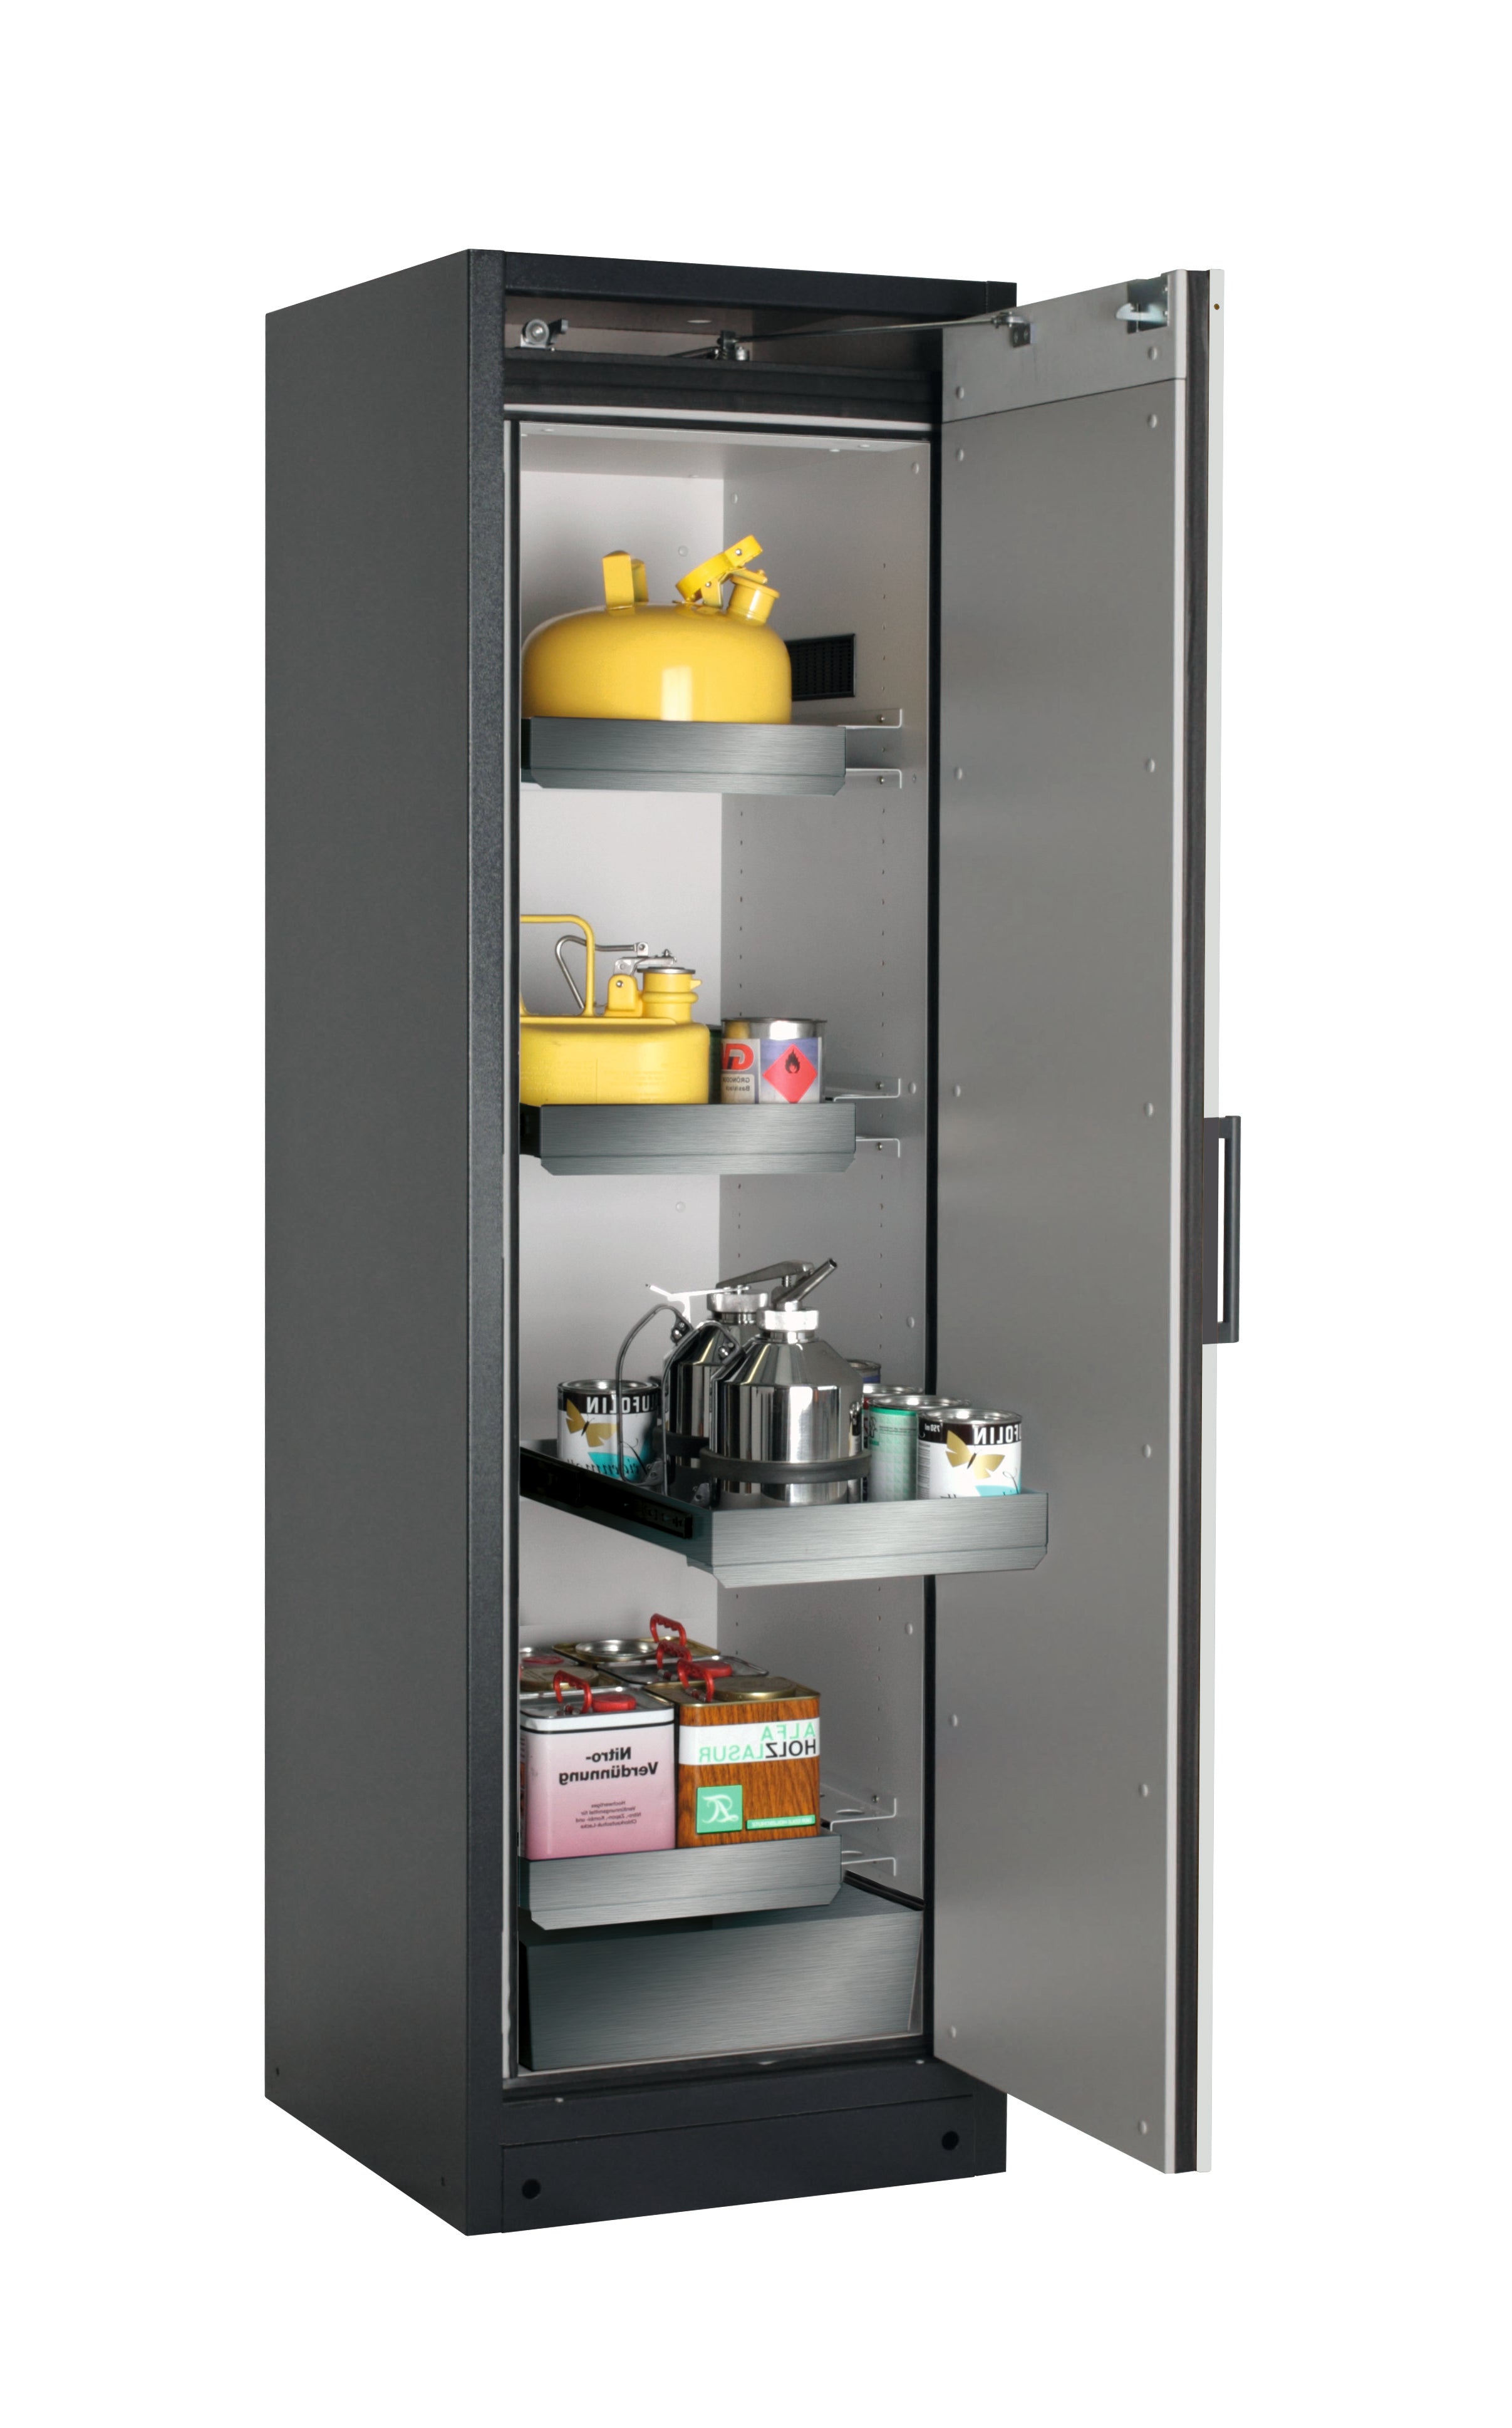 Type 90 safety storage cabinet Q-PEGASUS-90 model Q90.195.060.WDACR in light grey RAL 7035 with 3x drawer (standard) (stainless steel 1.4301),